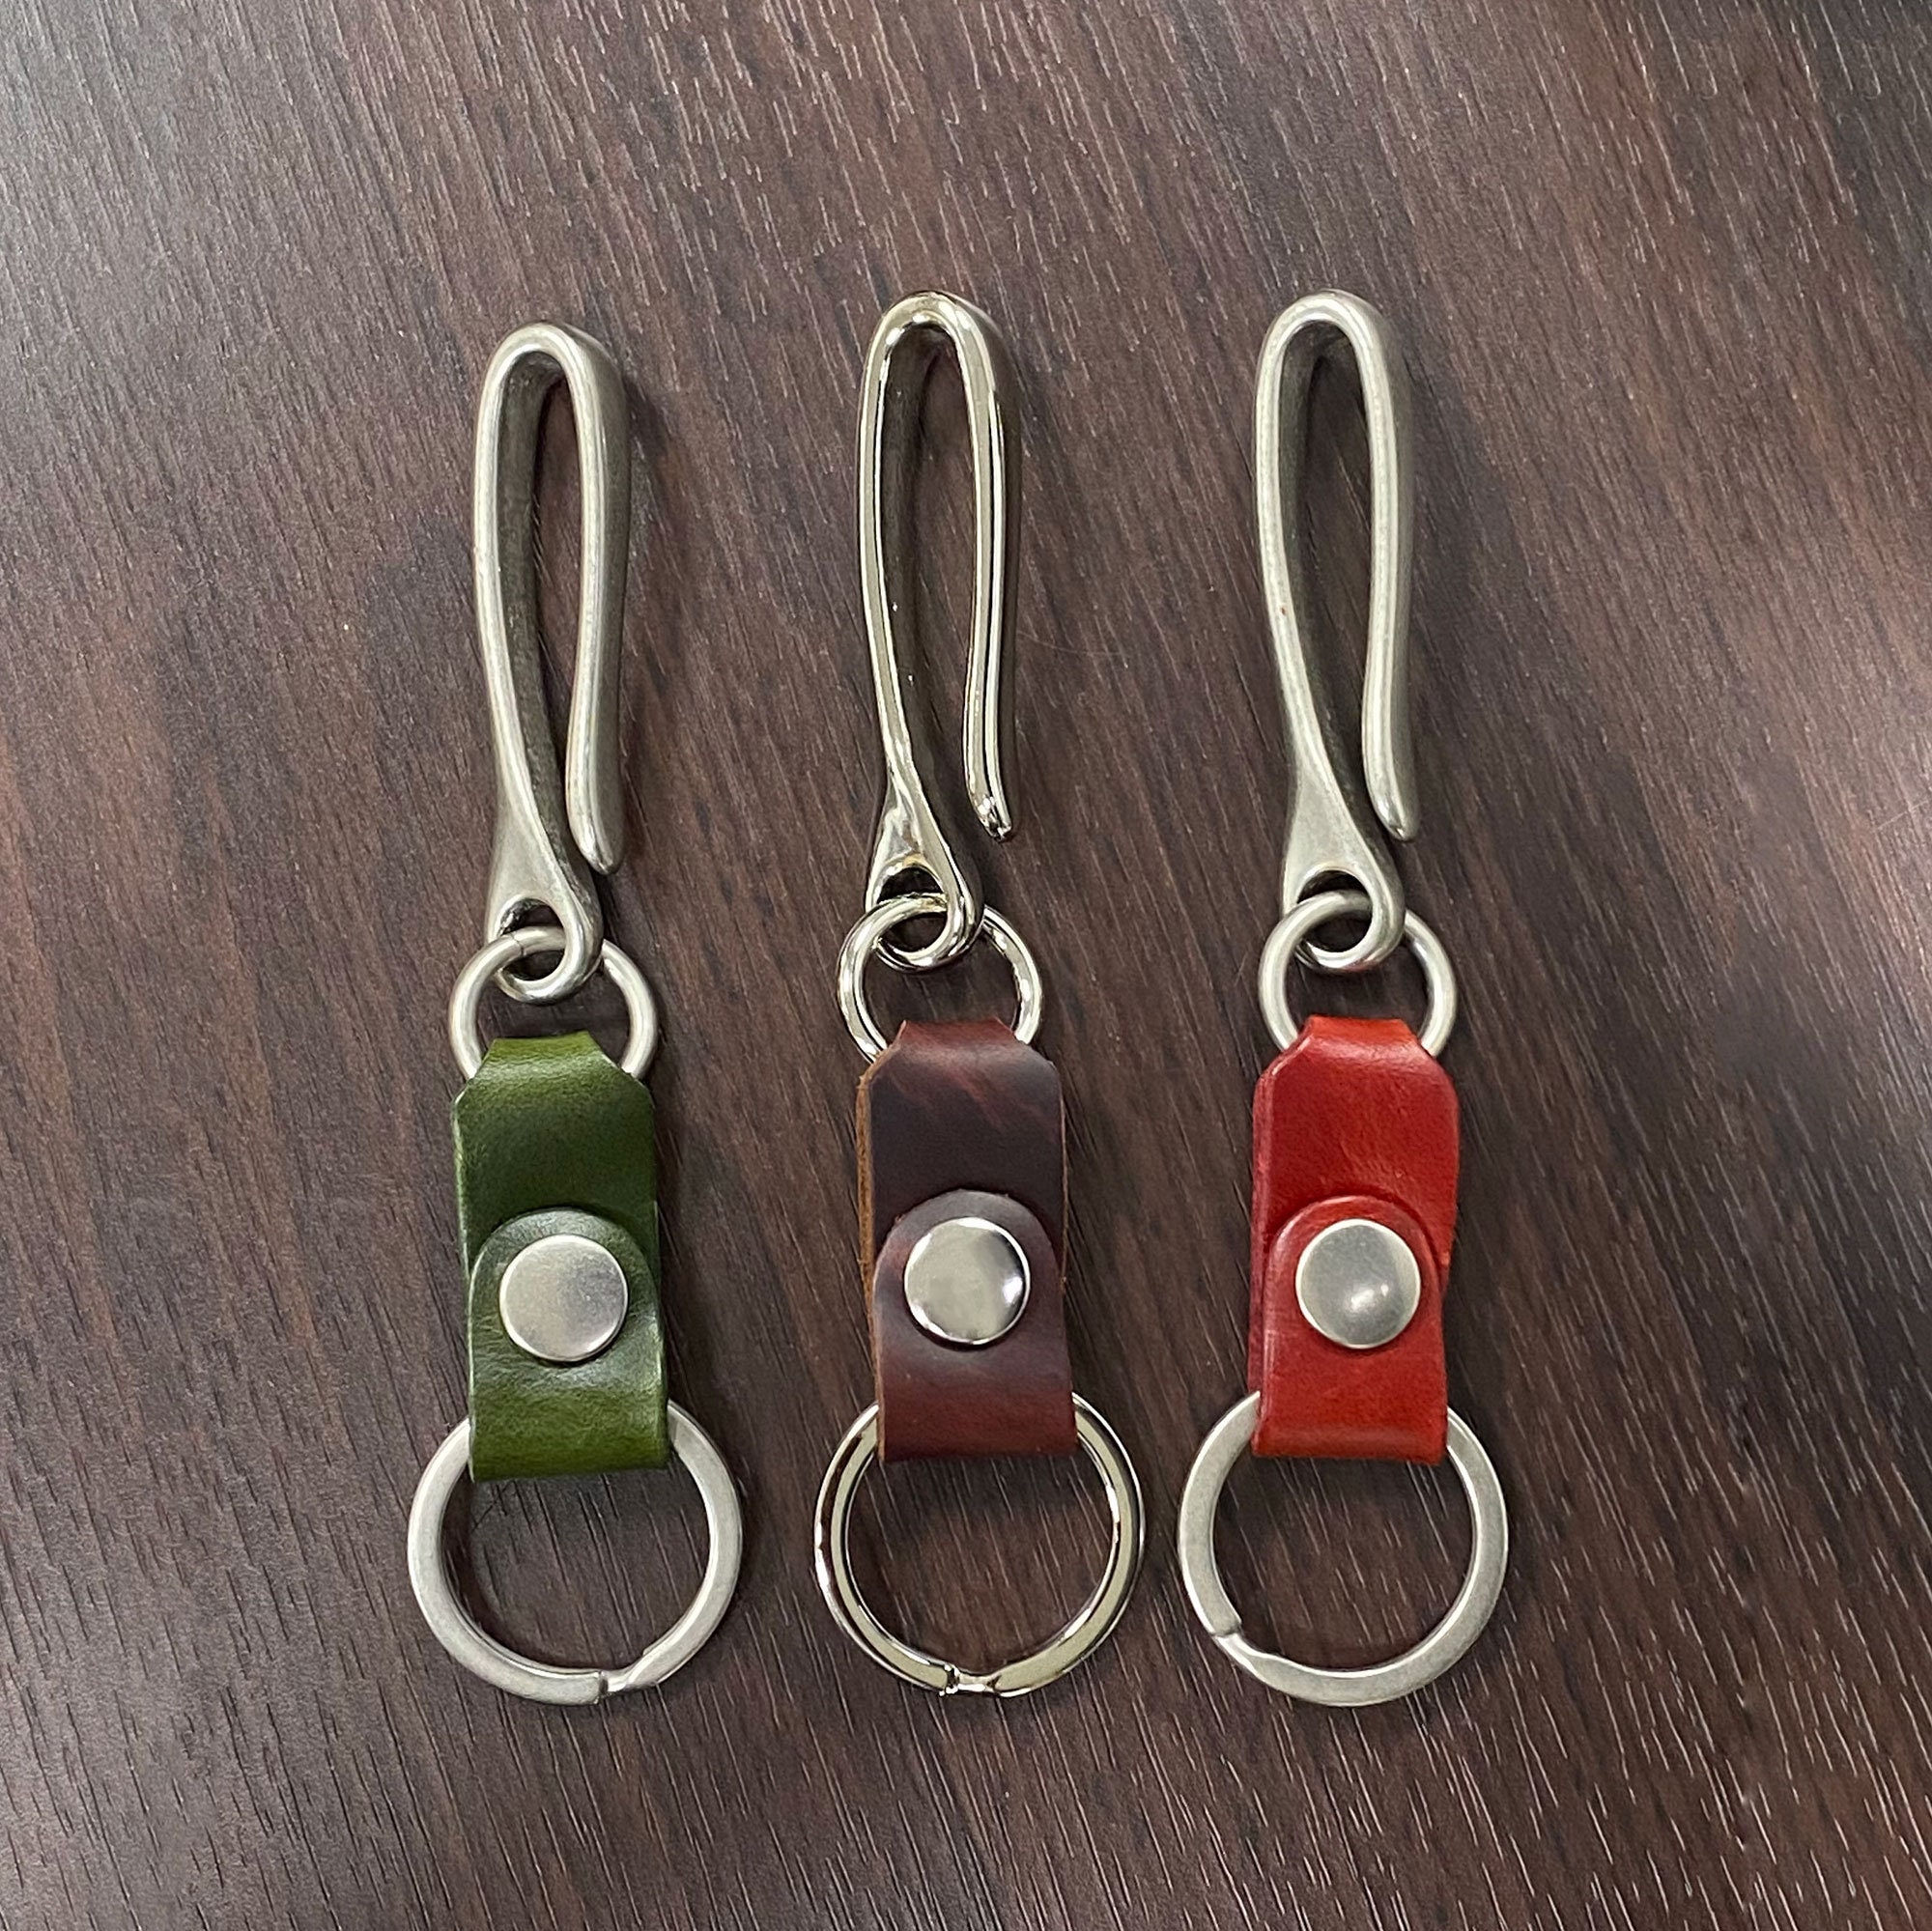 15 Hand Dyed Colors Key Keeper Snap Leather Key Chain Clip Holds